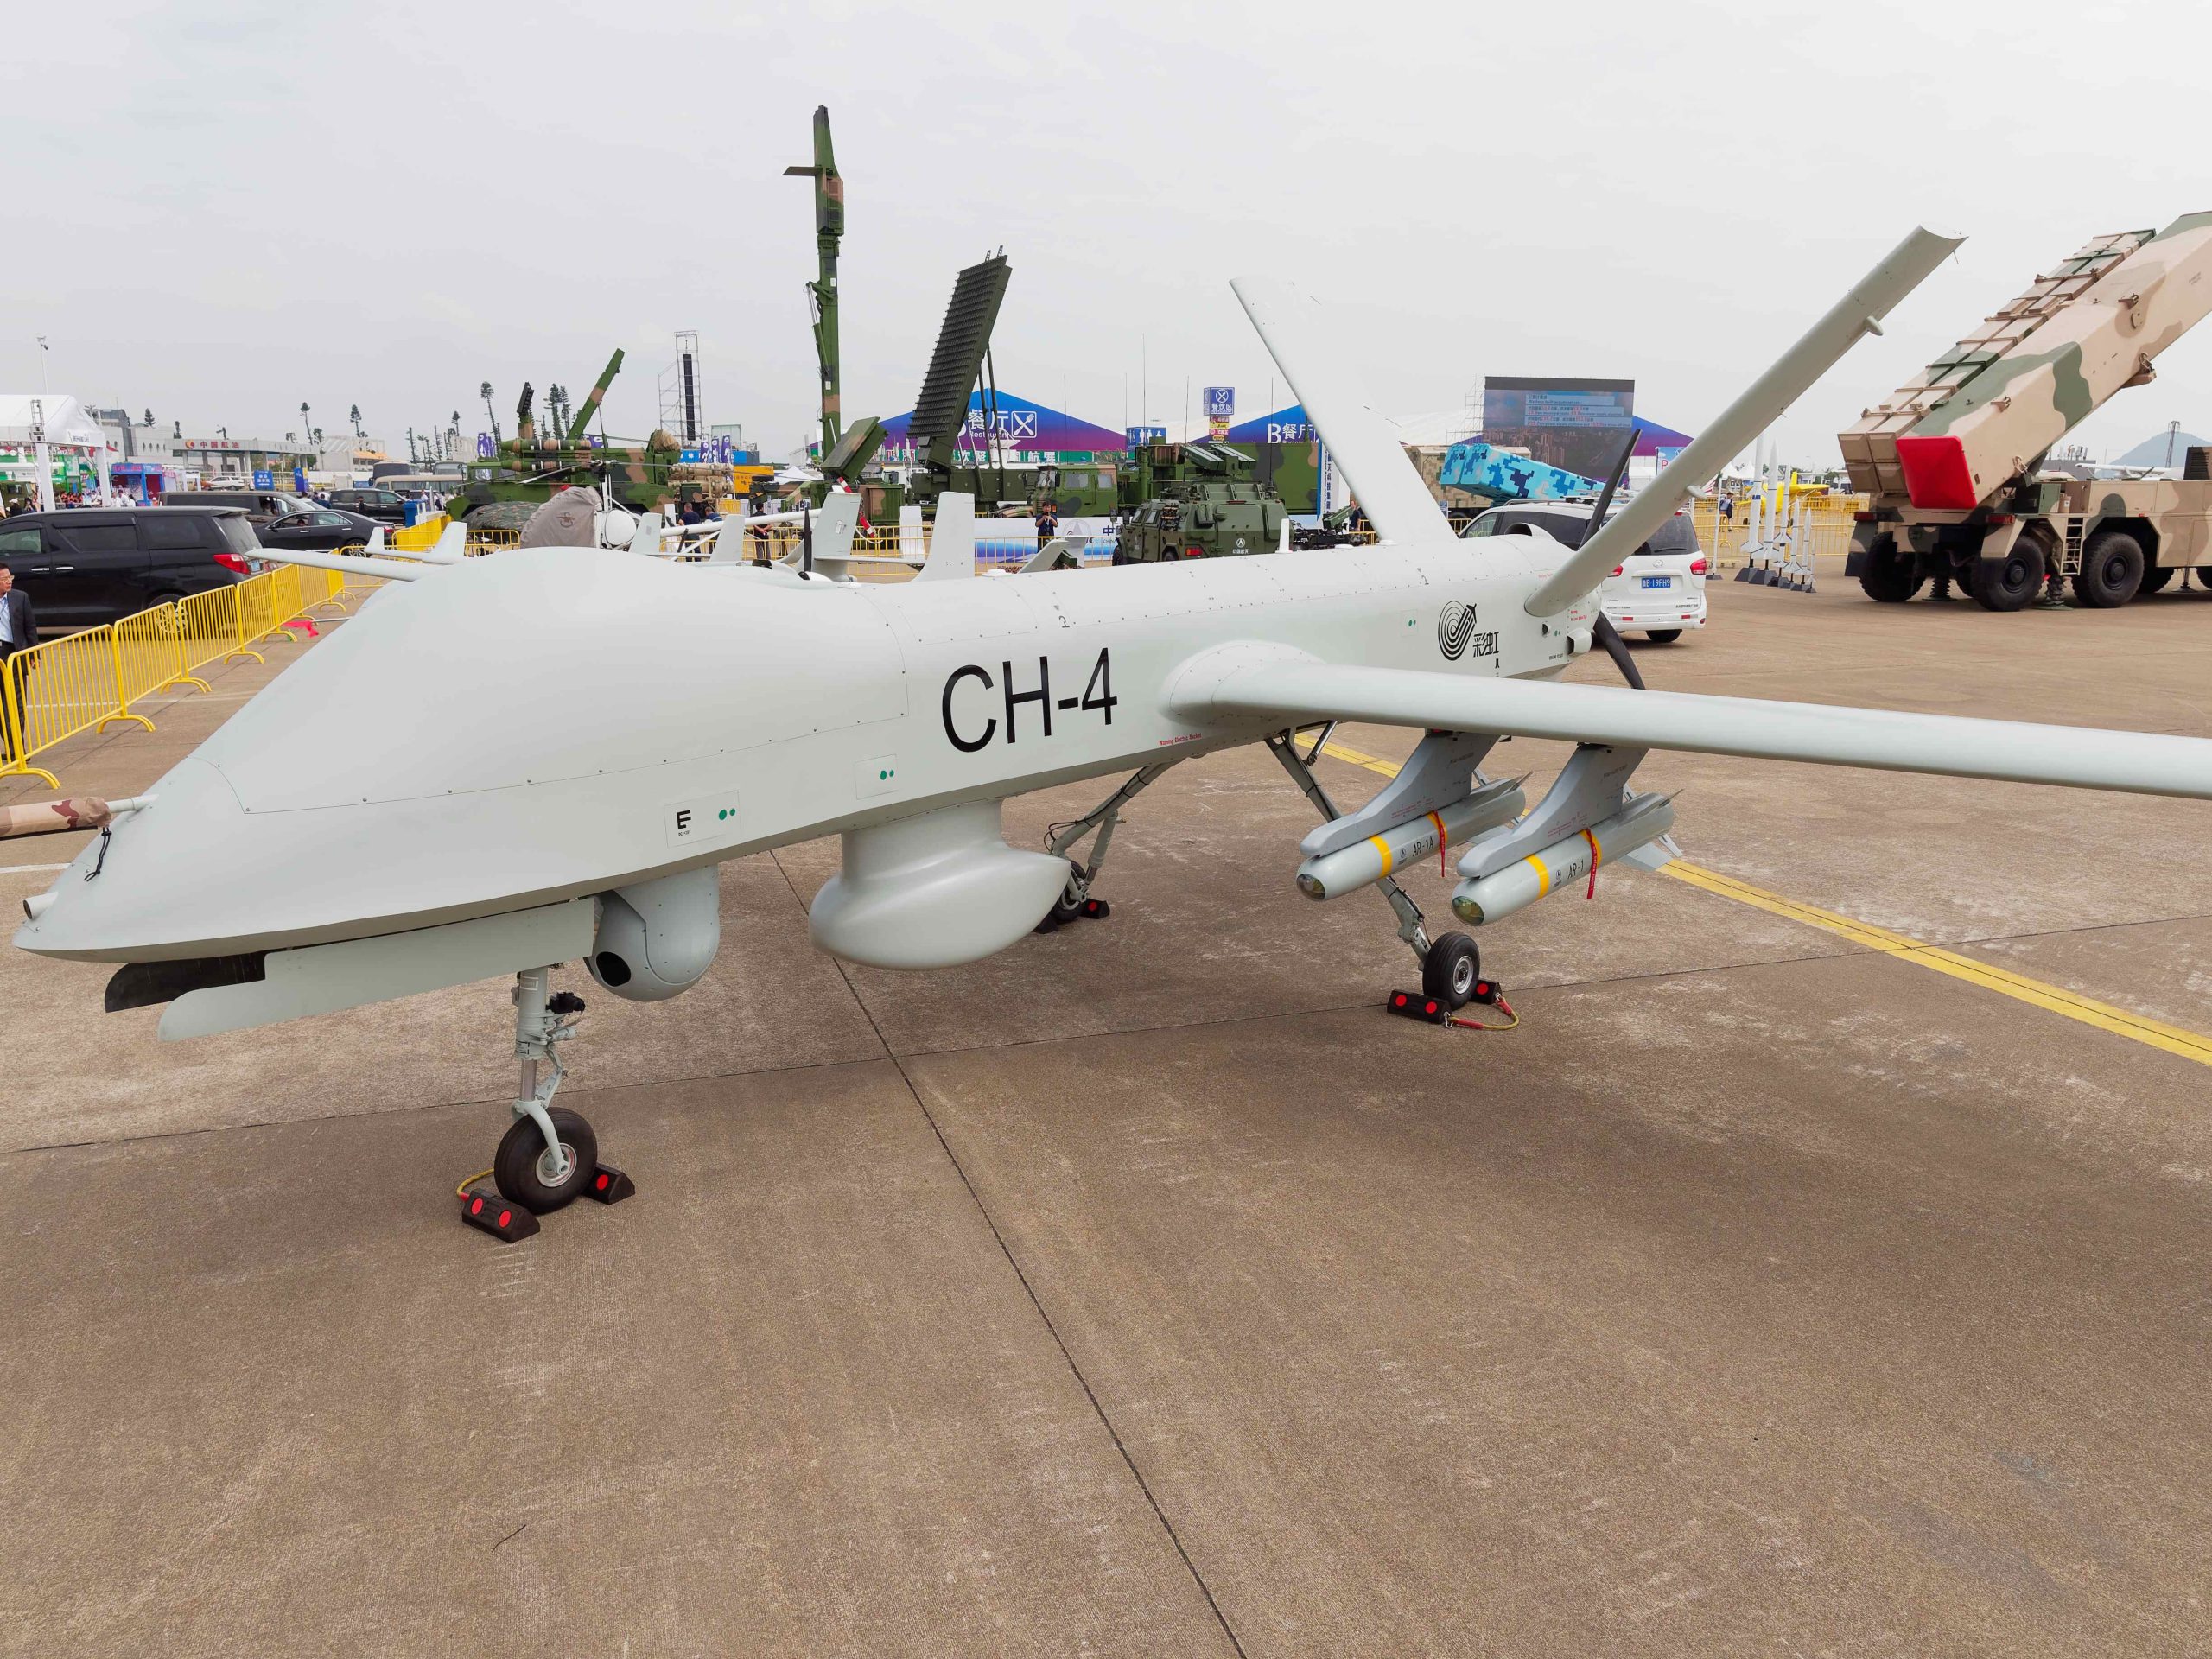 The Indonesian Air Force has acquired several examples of the Chinese-made CH-4 armed reconnaissance UAV.